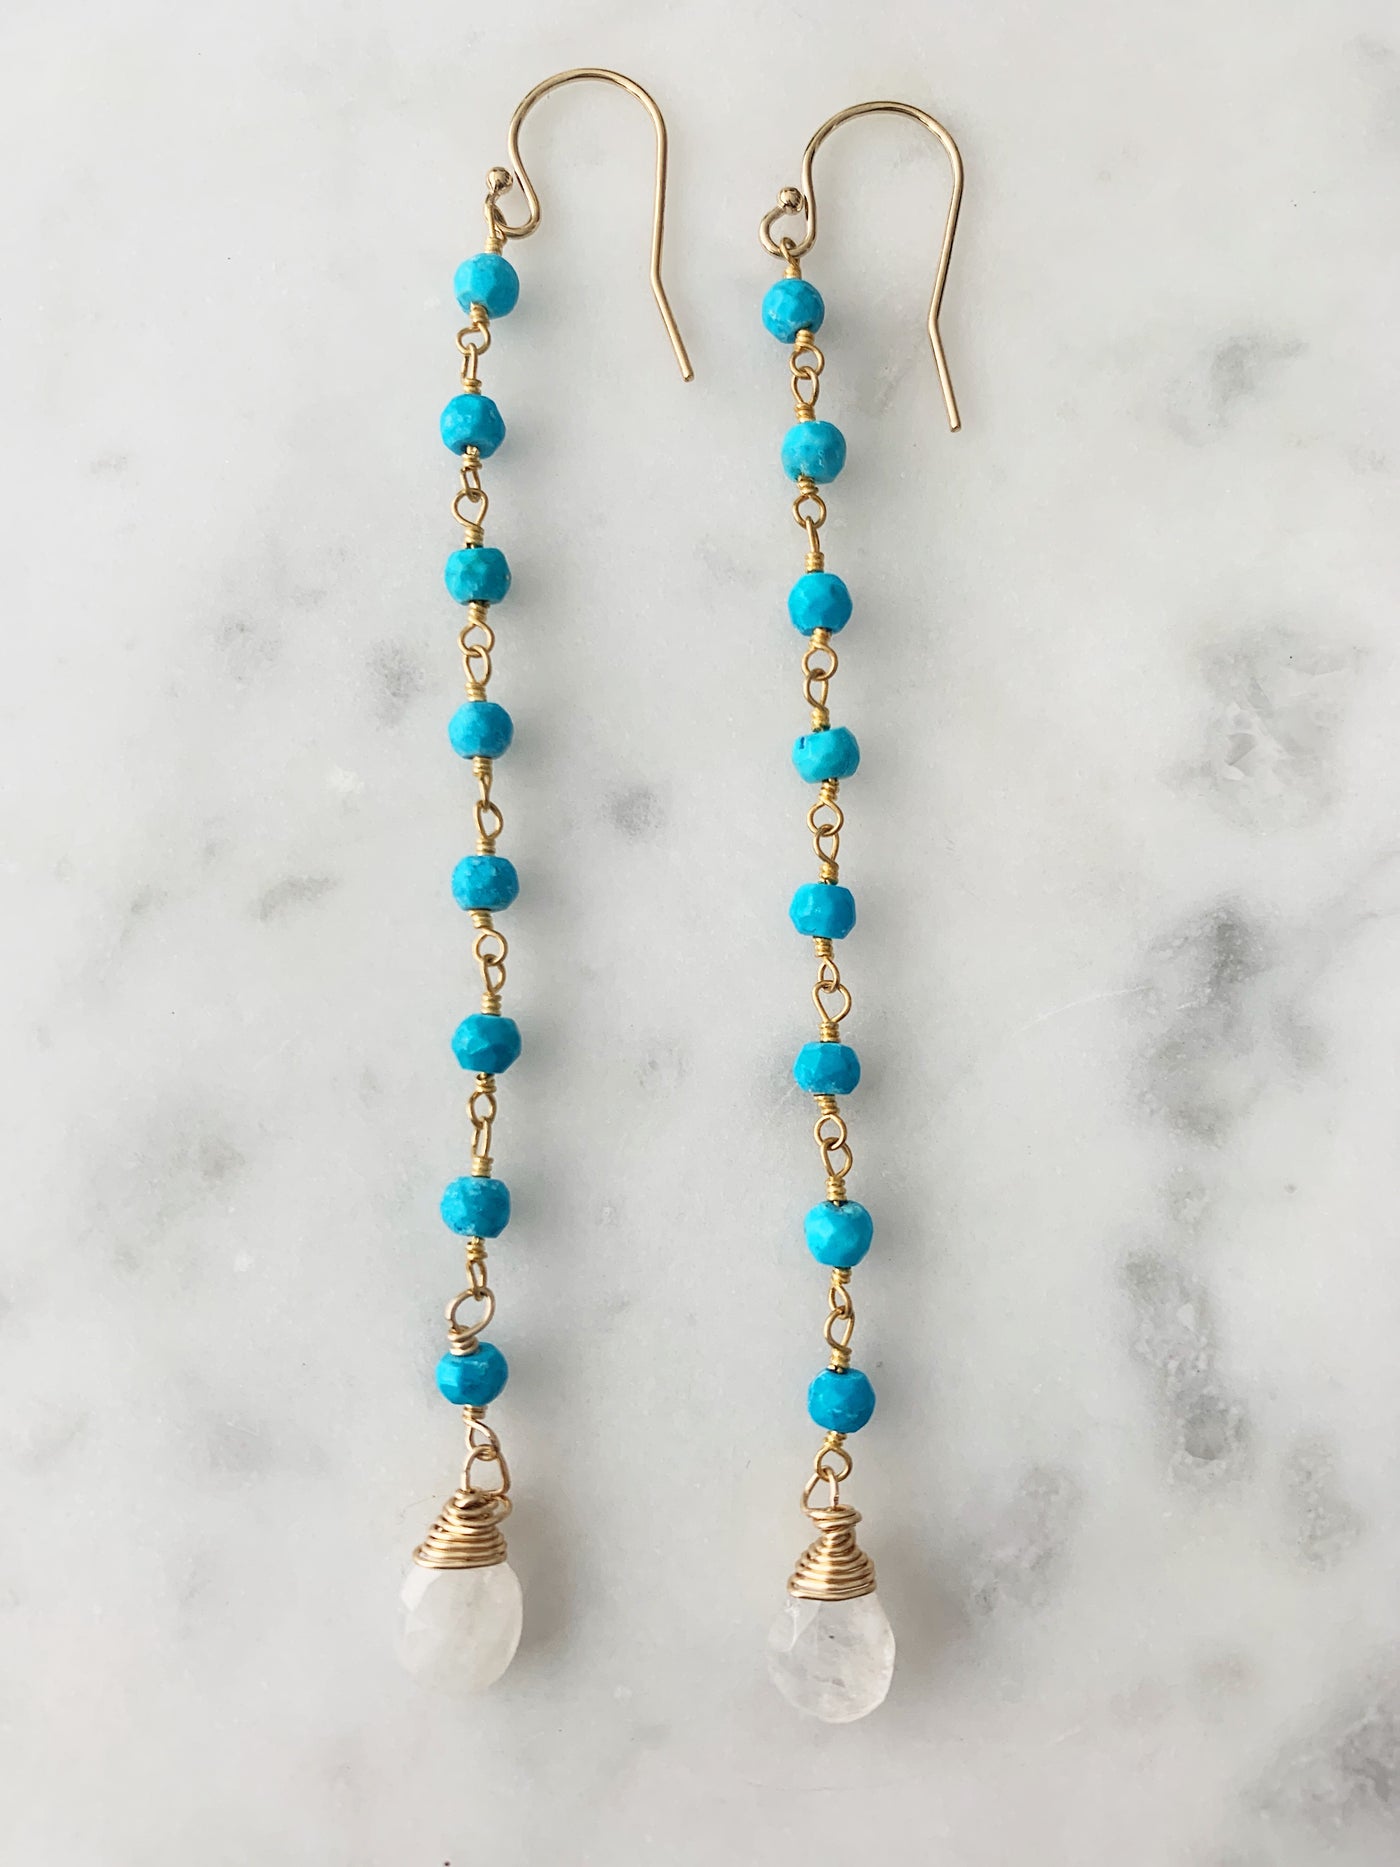 Turquoise Long Chain Earring with Moonstone Drop